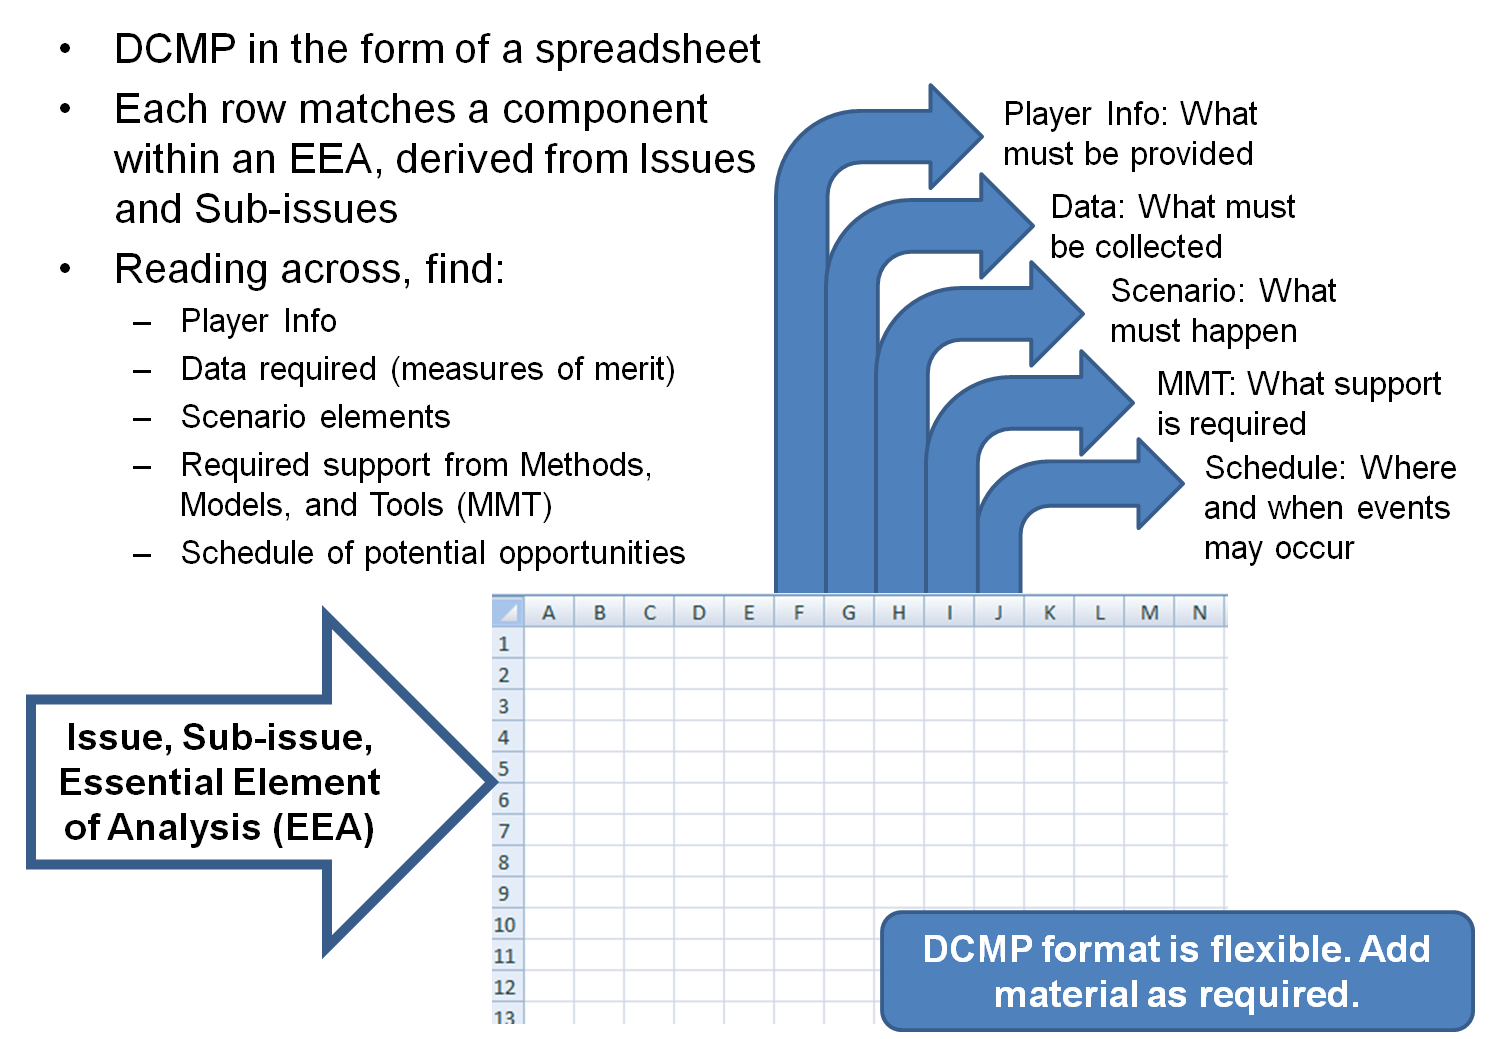 Spreadsheet formatting for a DCMP